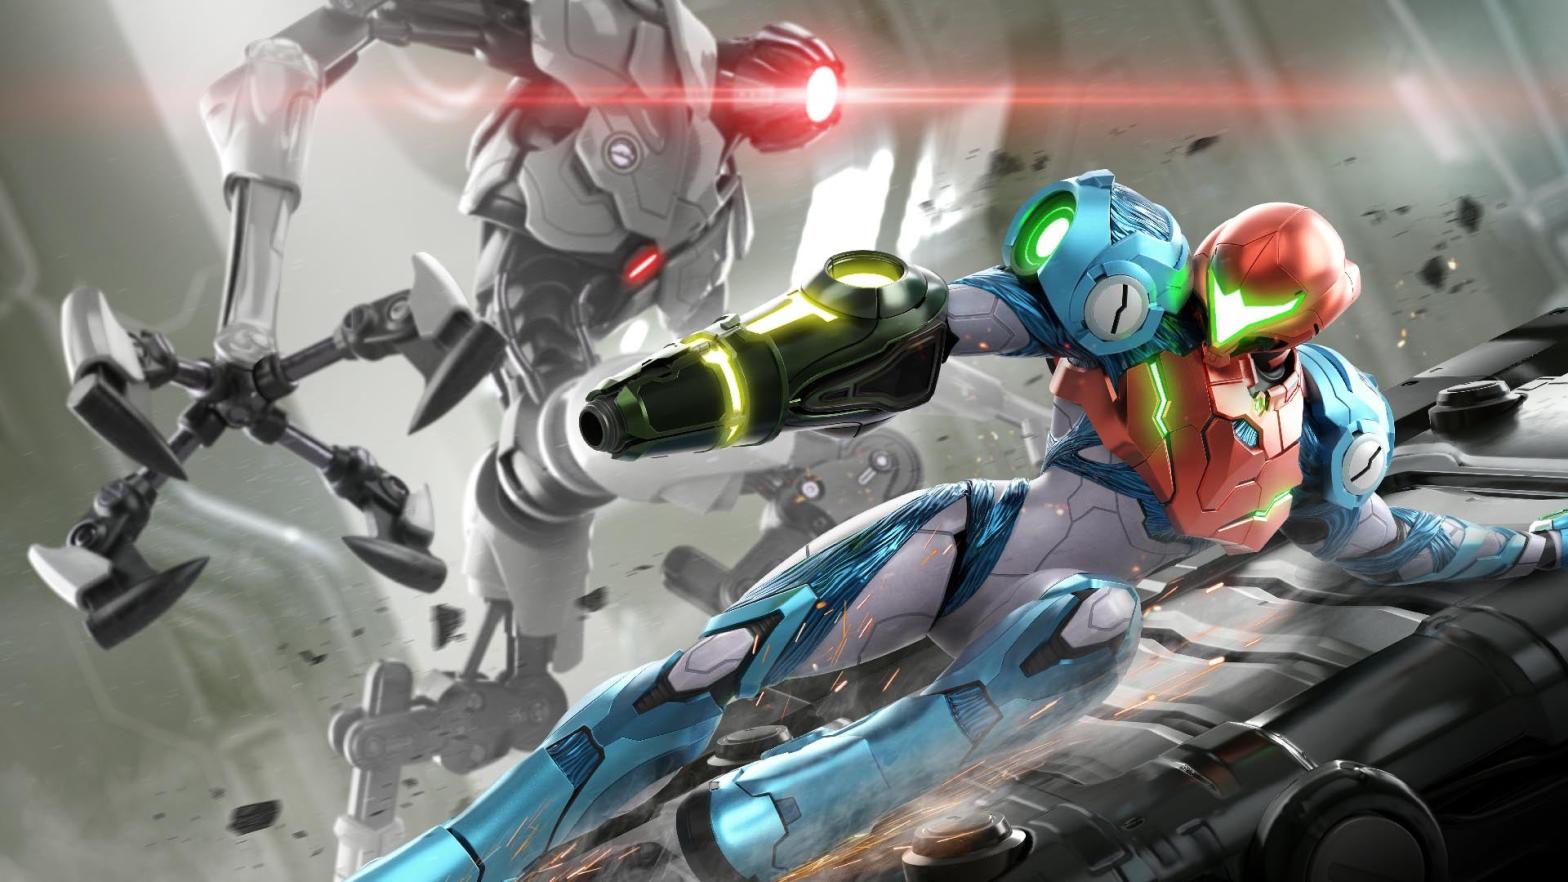 Metroid Dread is the next marquee release from Nintendo. (Image: Nintendo)